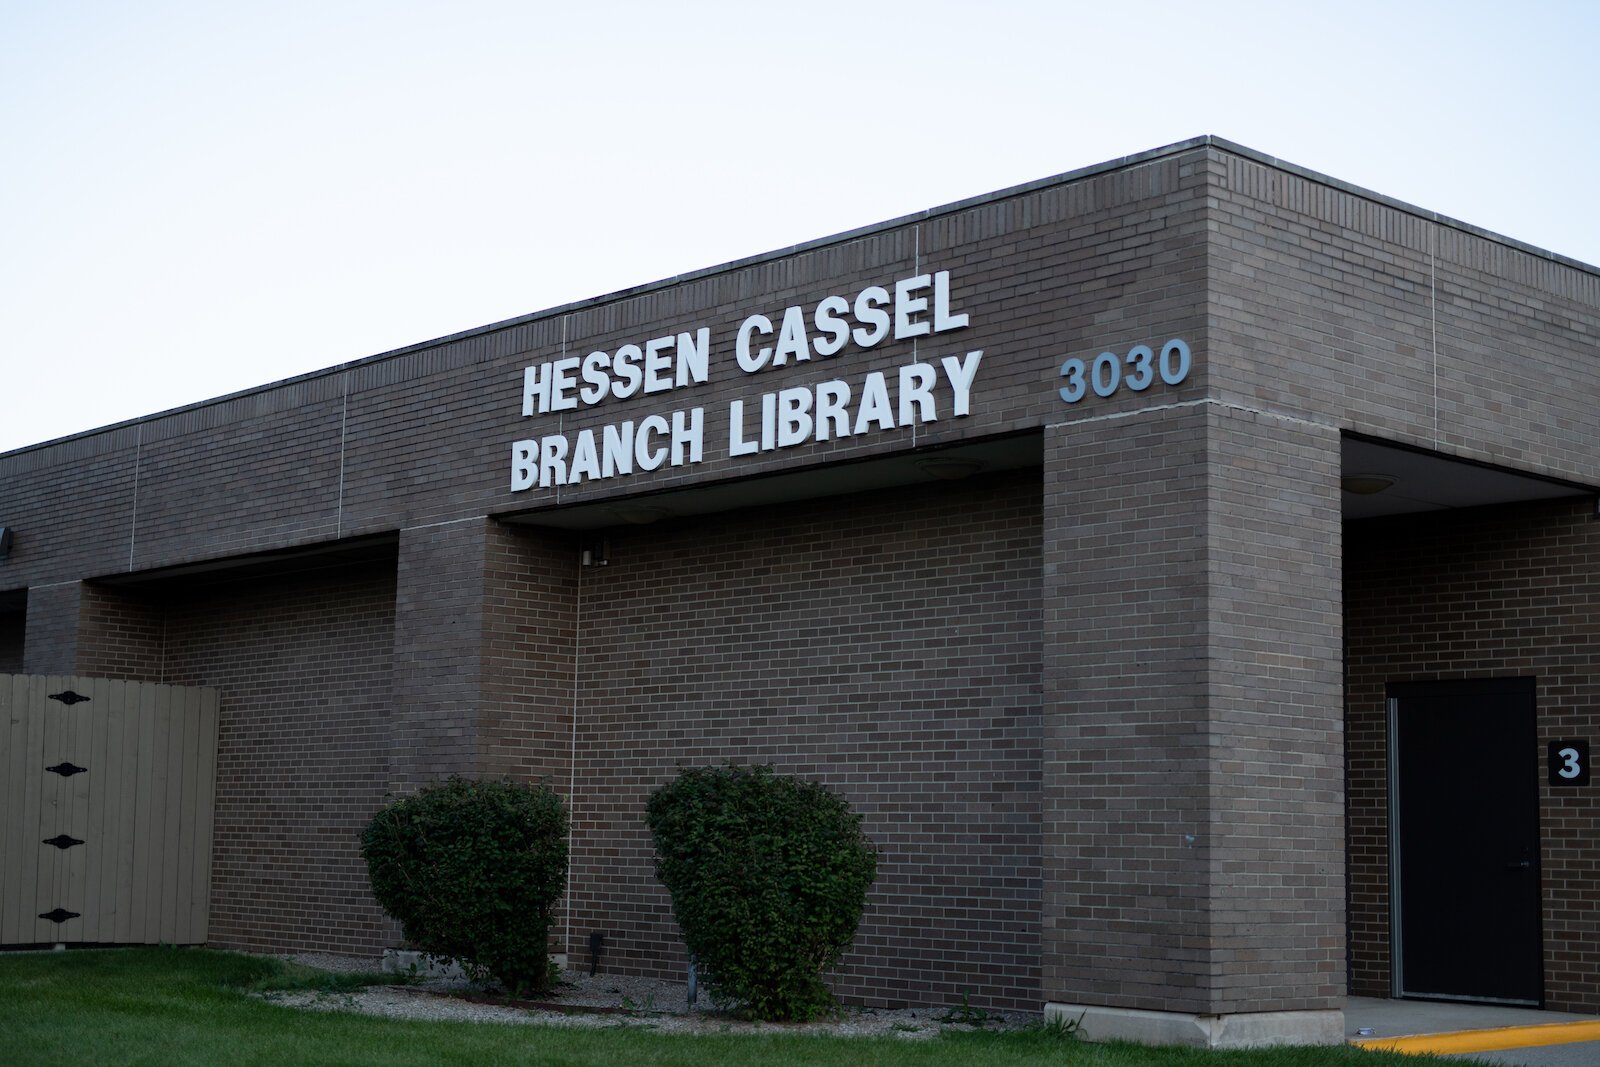 The Hessen Cassel branch of the Allen County Public Library.